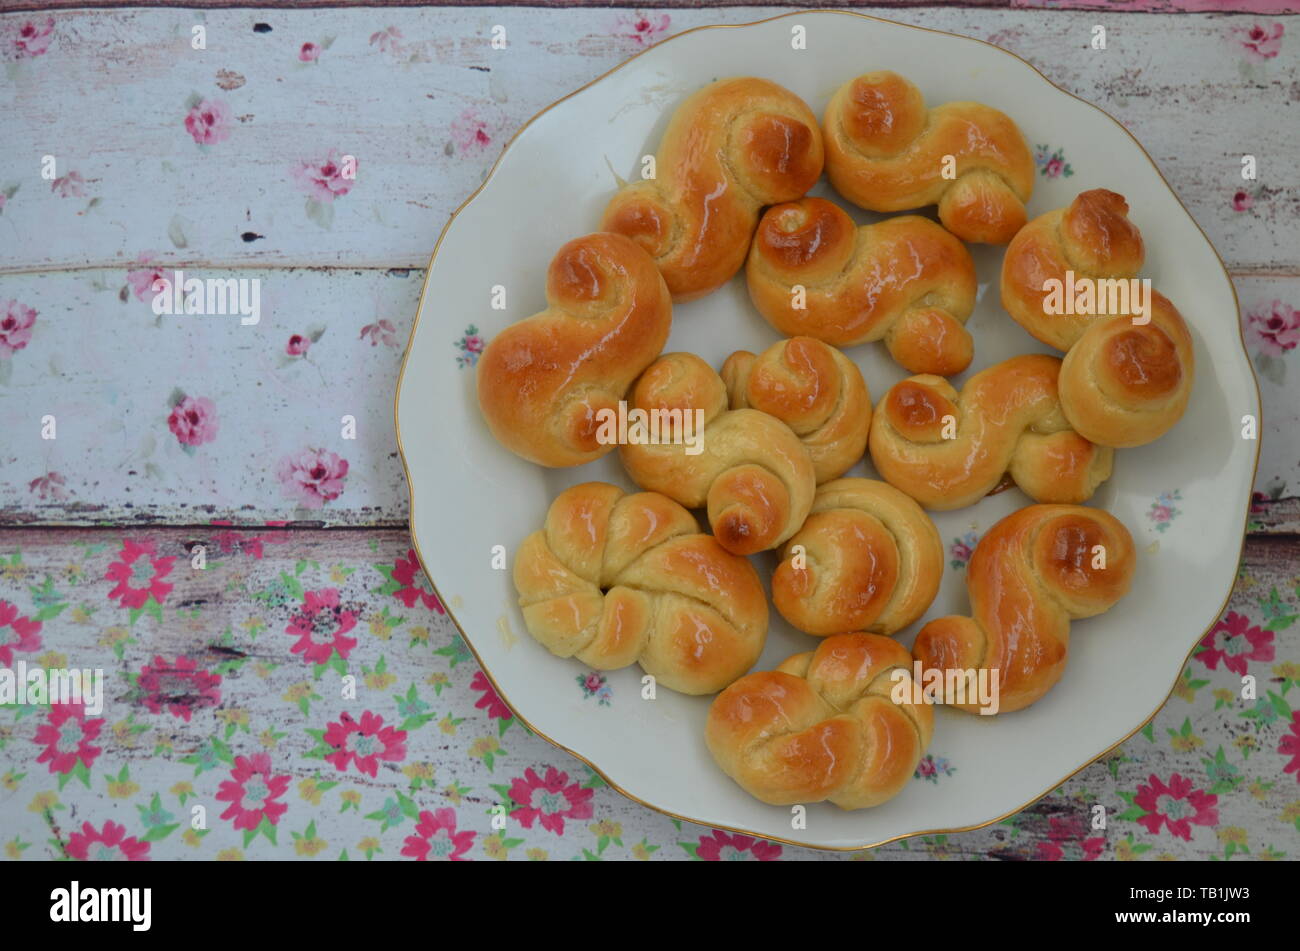 Home made traditional czech easter sweet yeast dough pastry with honey glaze: Jidase or Jidasky (Judas Knots).  They are traditionally baked and eaten Stock Photo